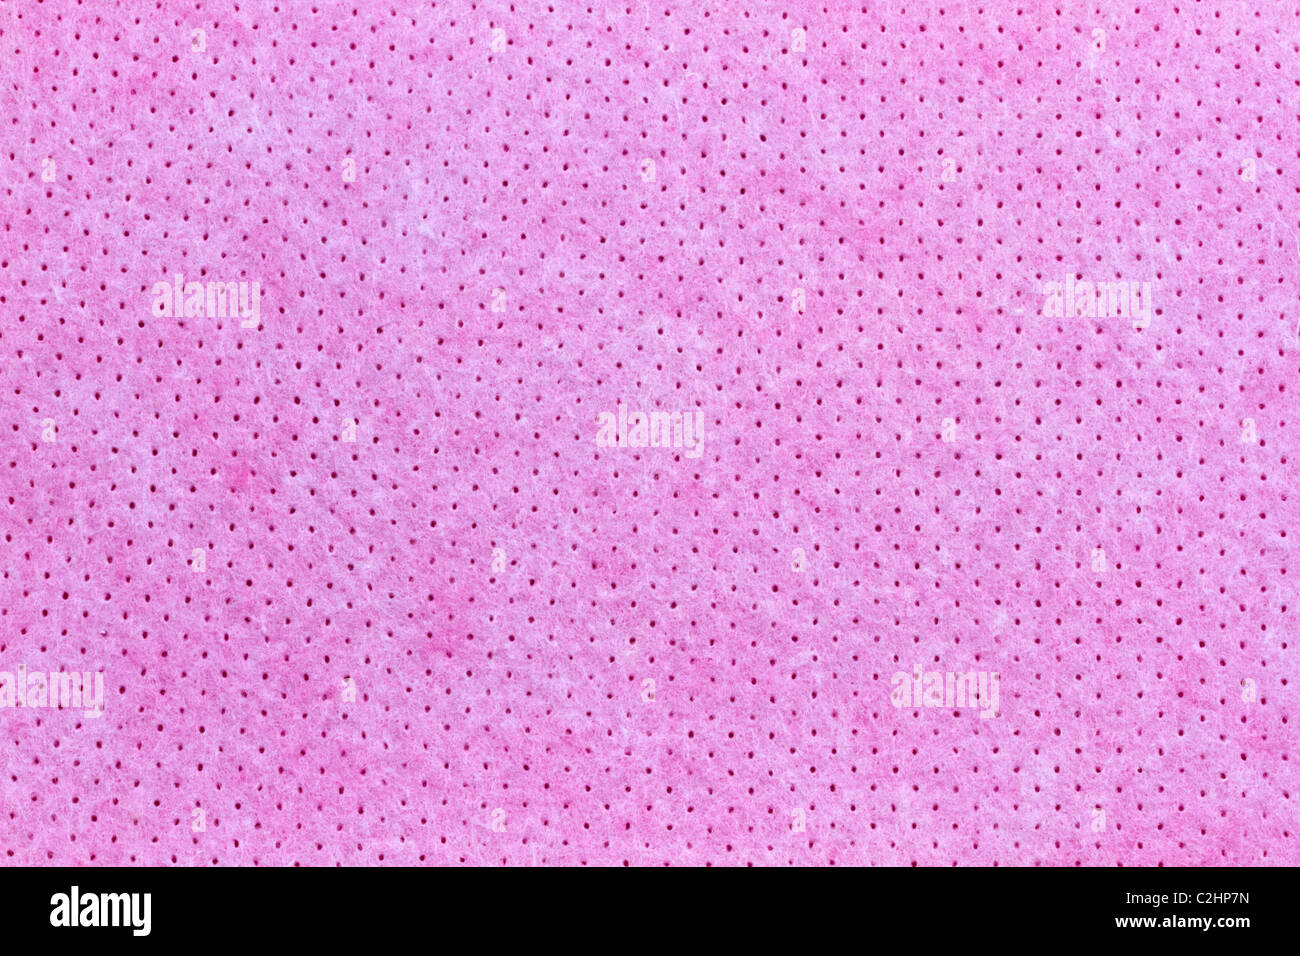 Texture of pink fabric background Stock Photo